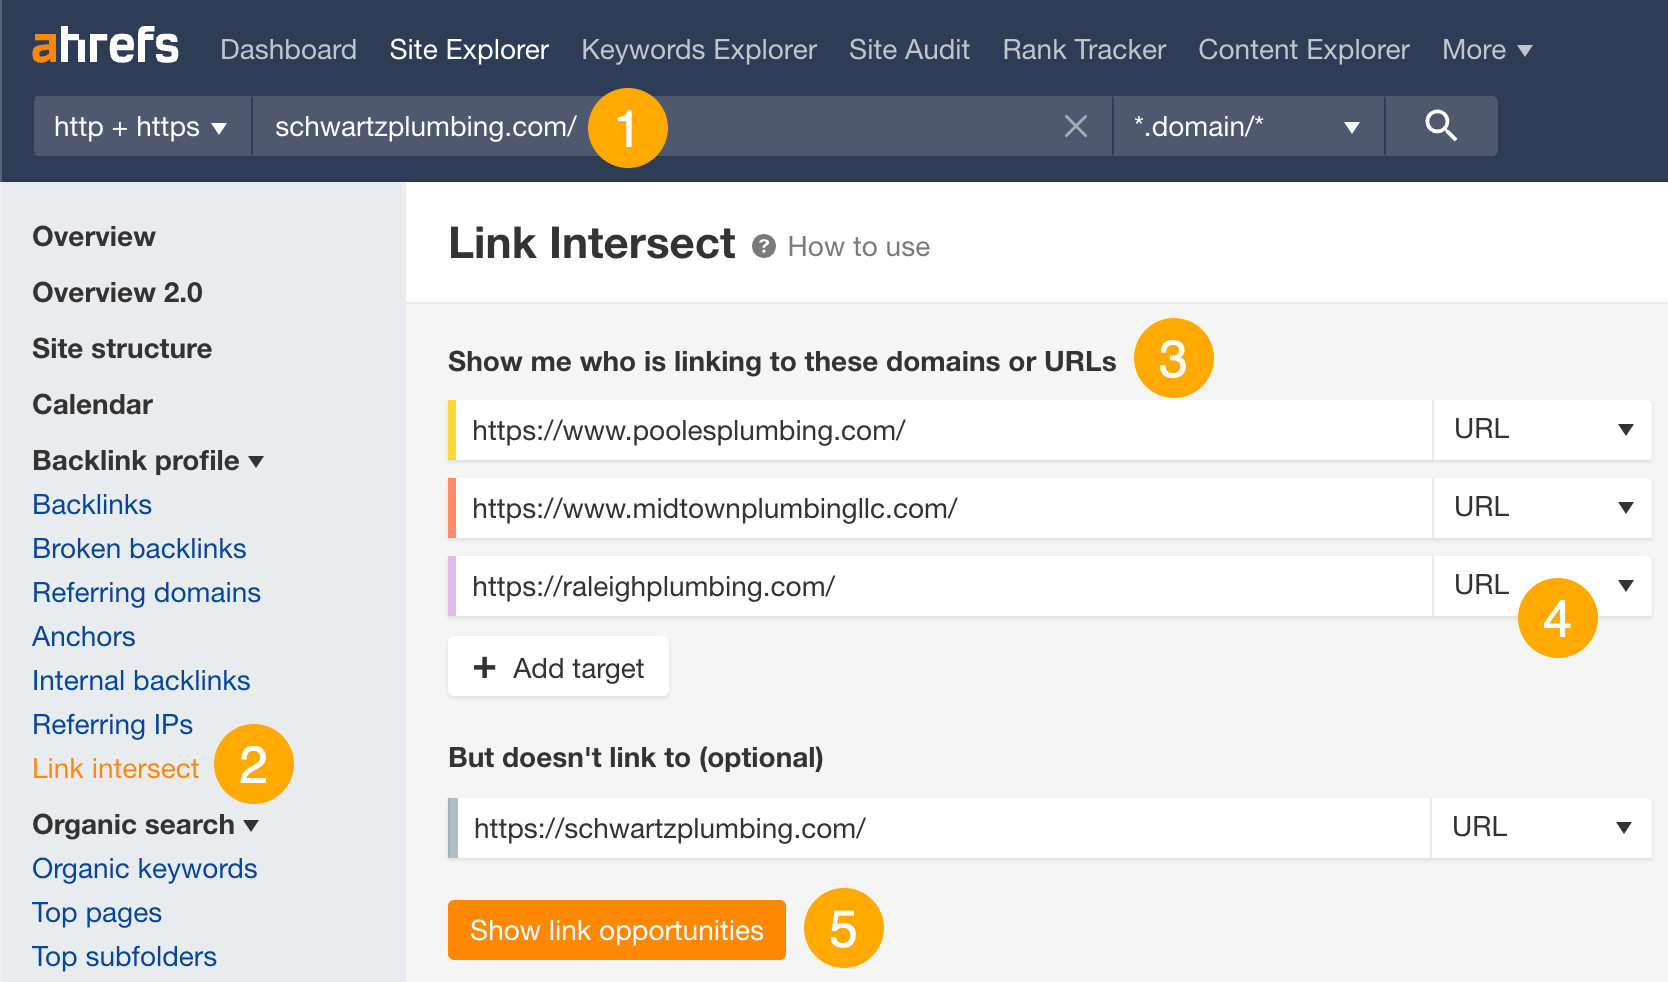 How to use the Link Intersect report in Ahrefs' Site Explorer
